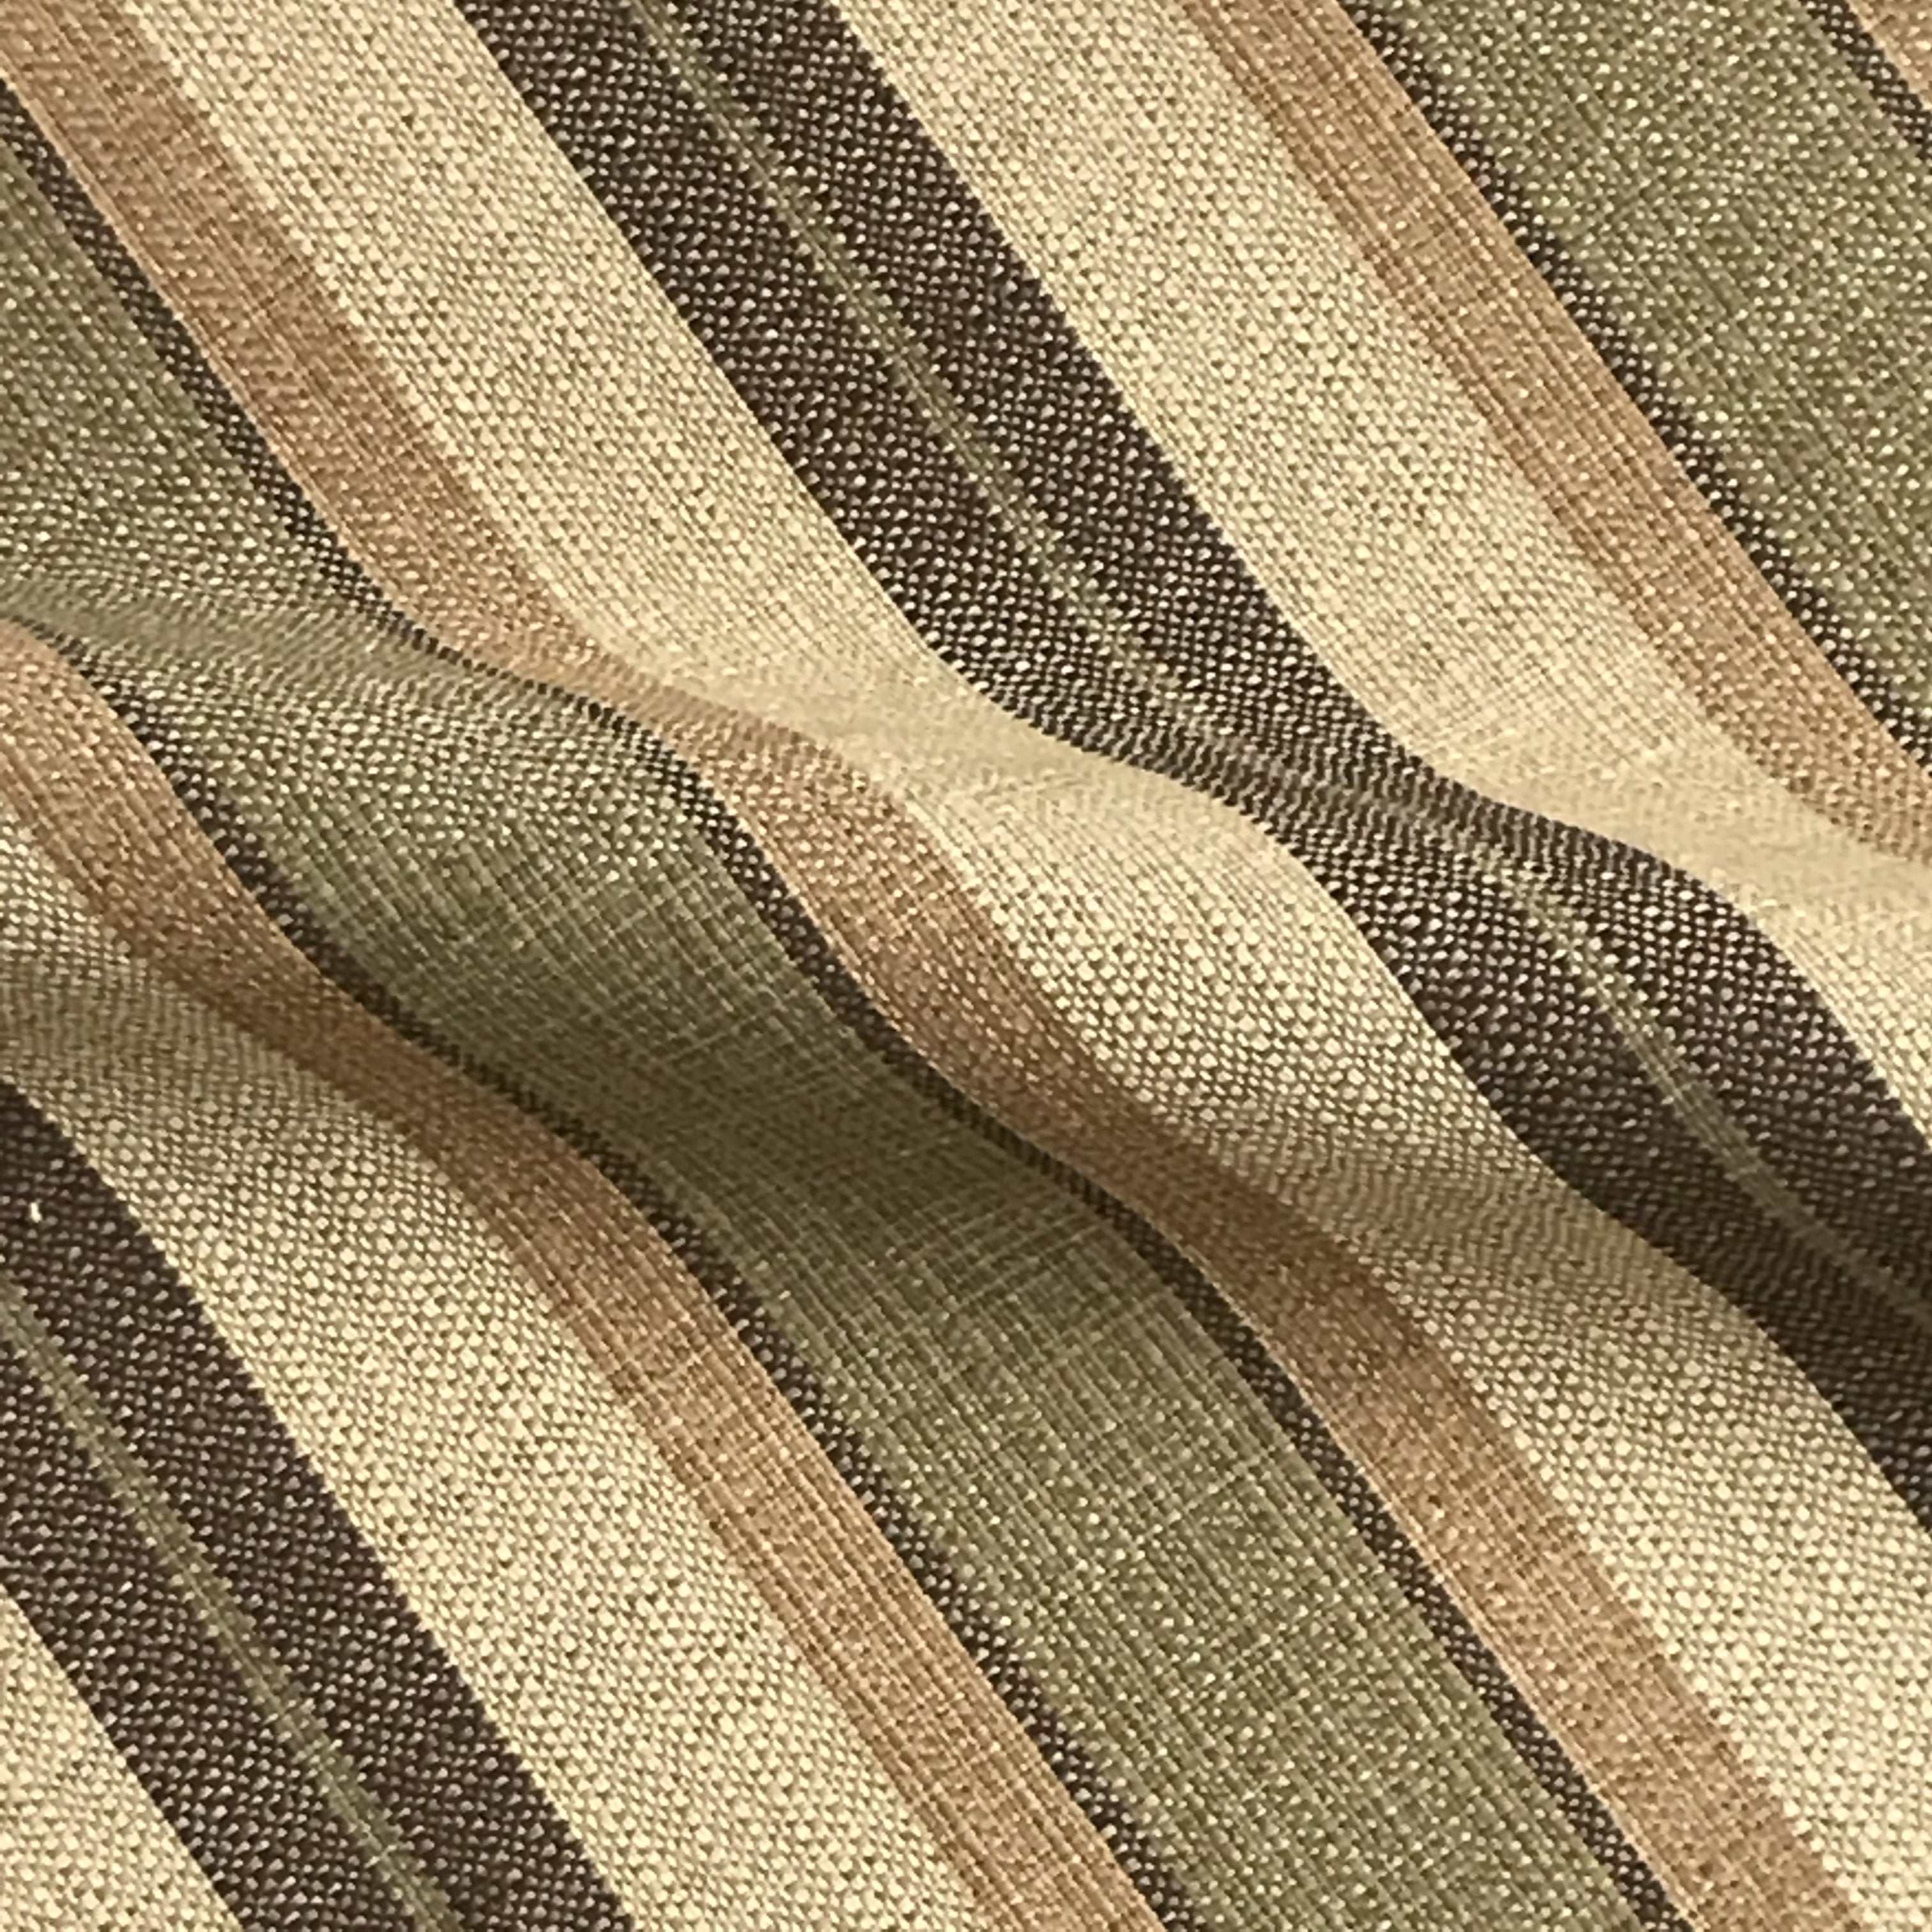 Farmhouse Rustic Brown Stripe Woven Upholstery Fabric - 54